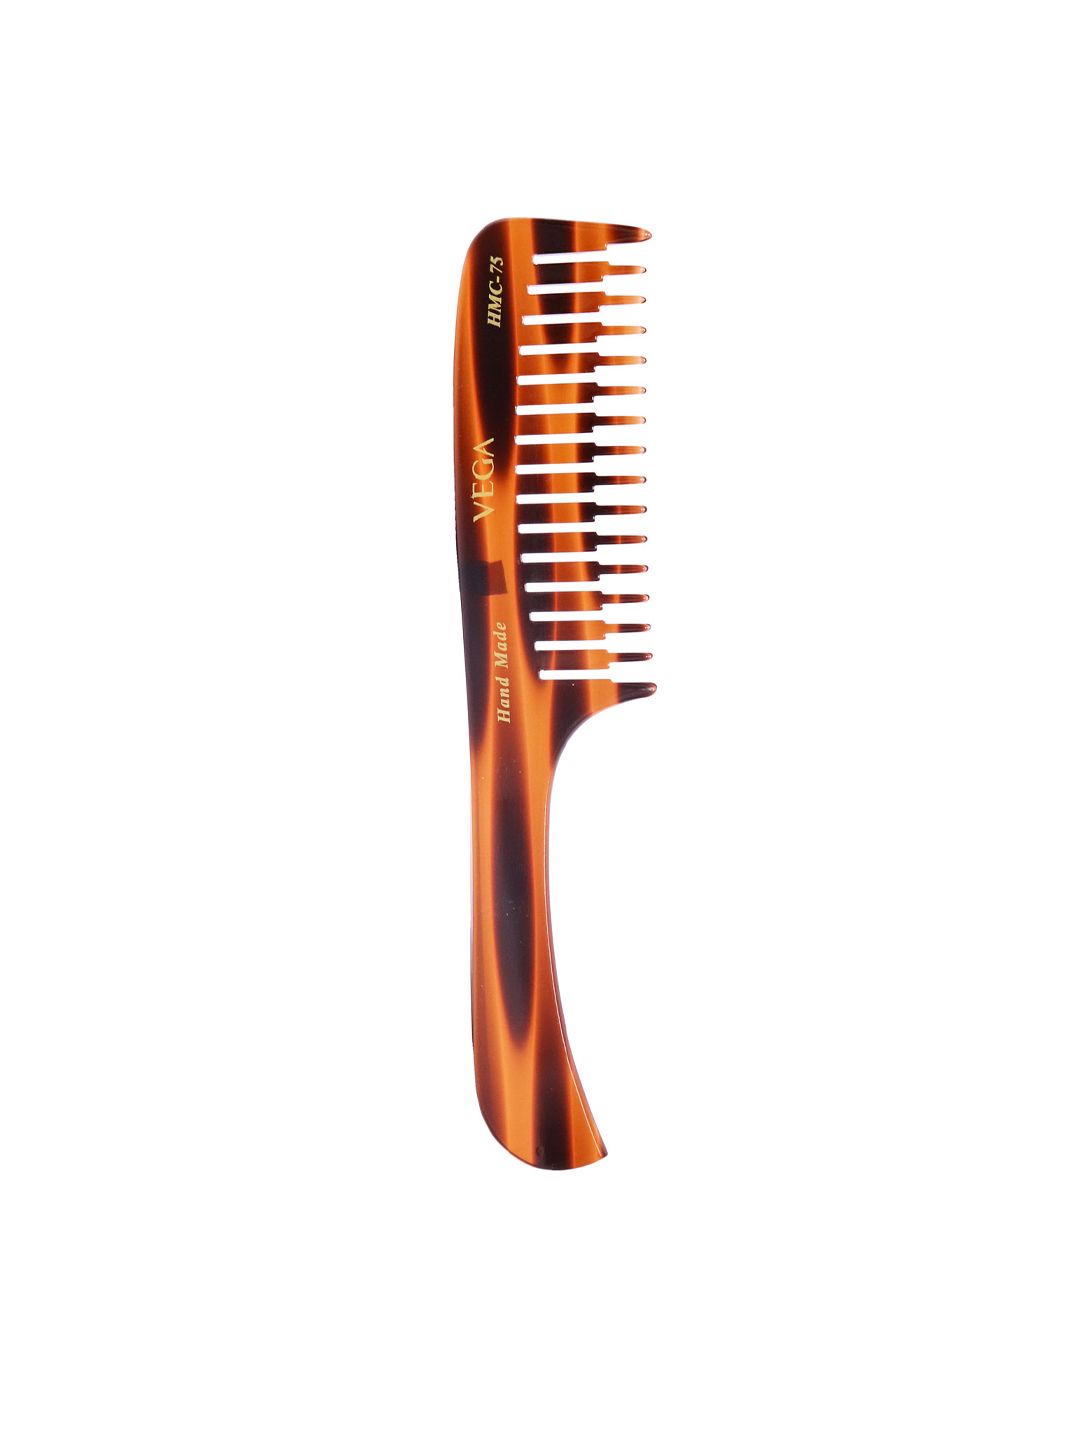 VEGA Brown Handcrafted Step Grooming Comb HMC 75 Price in India